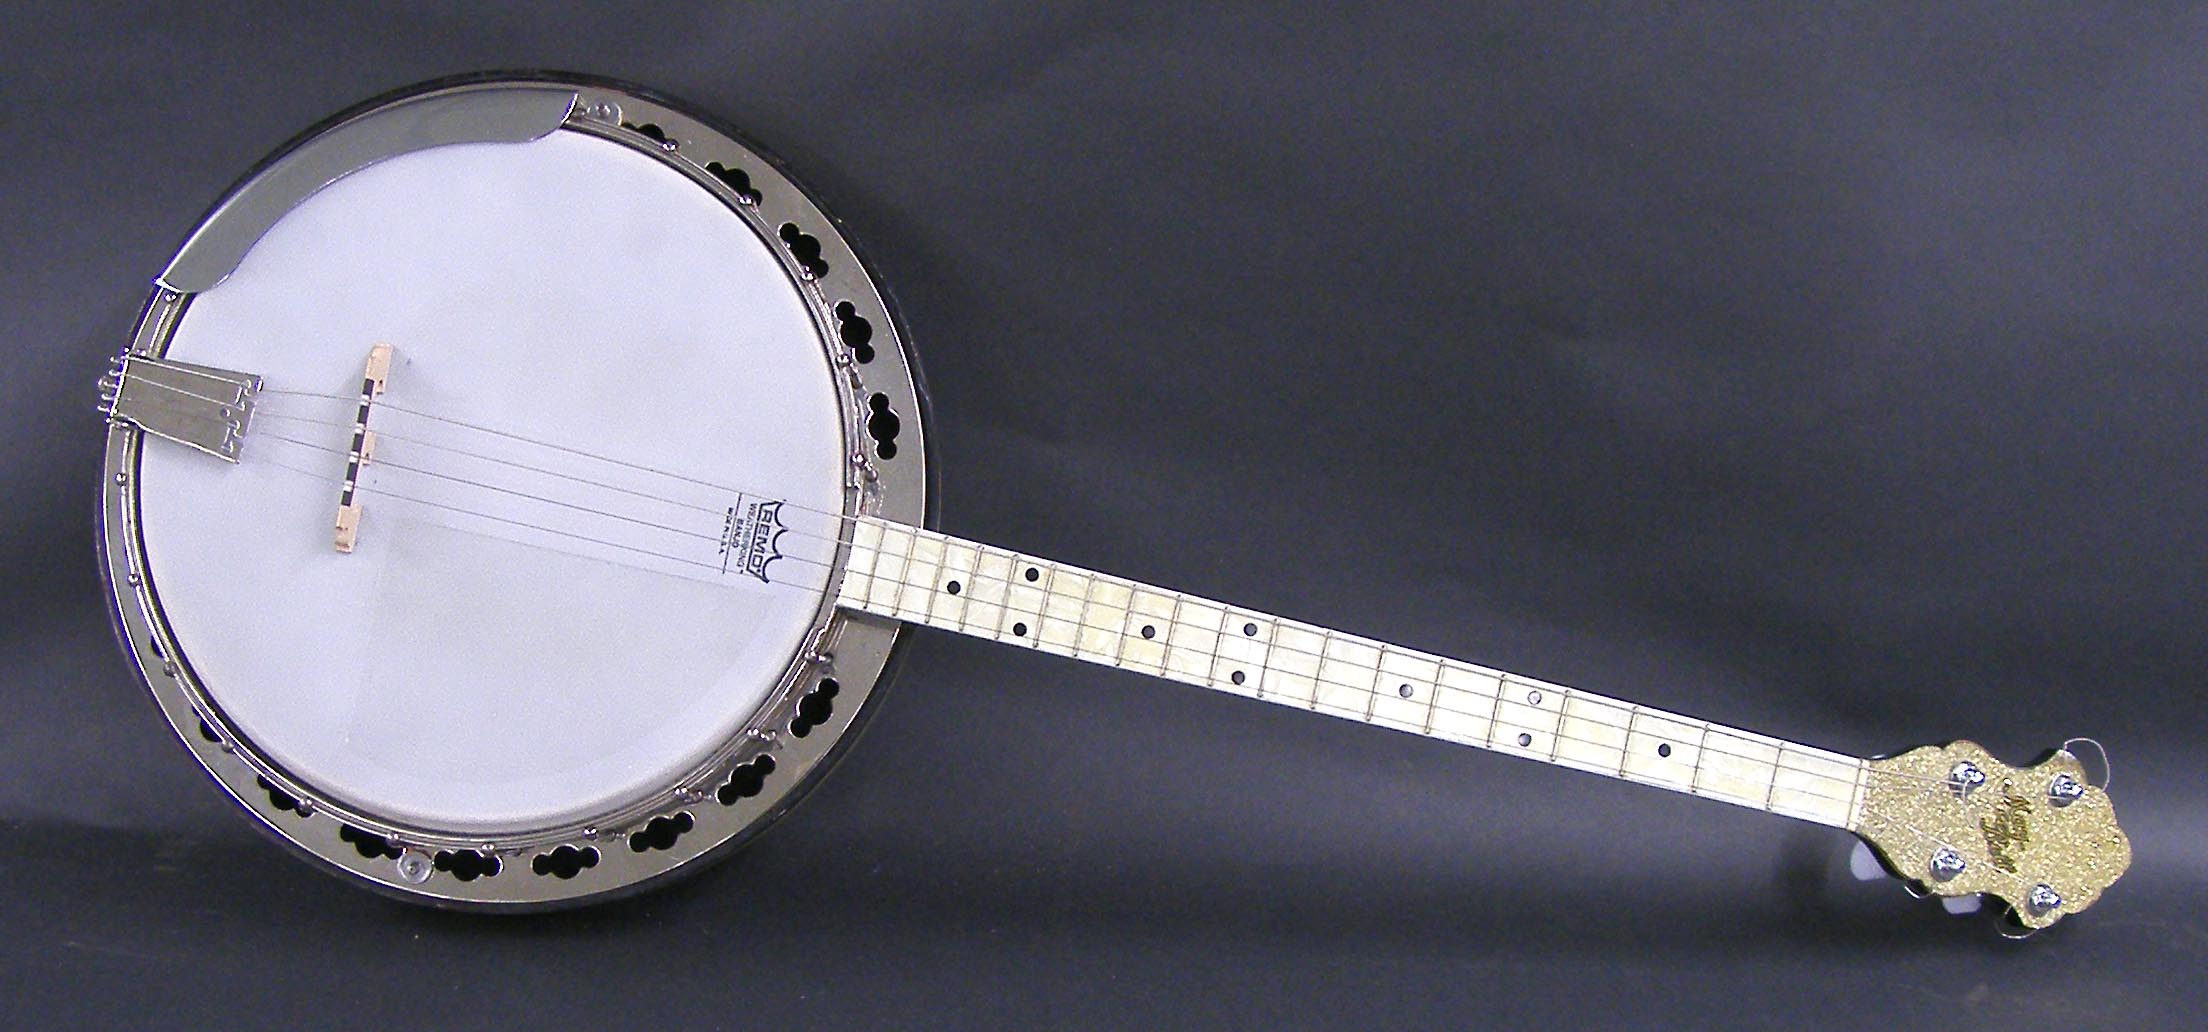 Slingerland May-Bell four string tenor resonator banjo, the shaped headstock signed May-Bell, gold